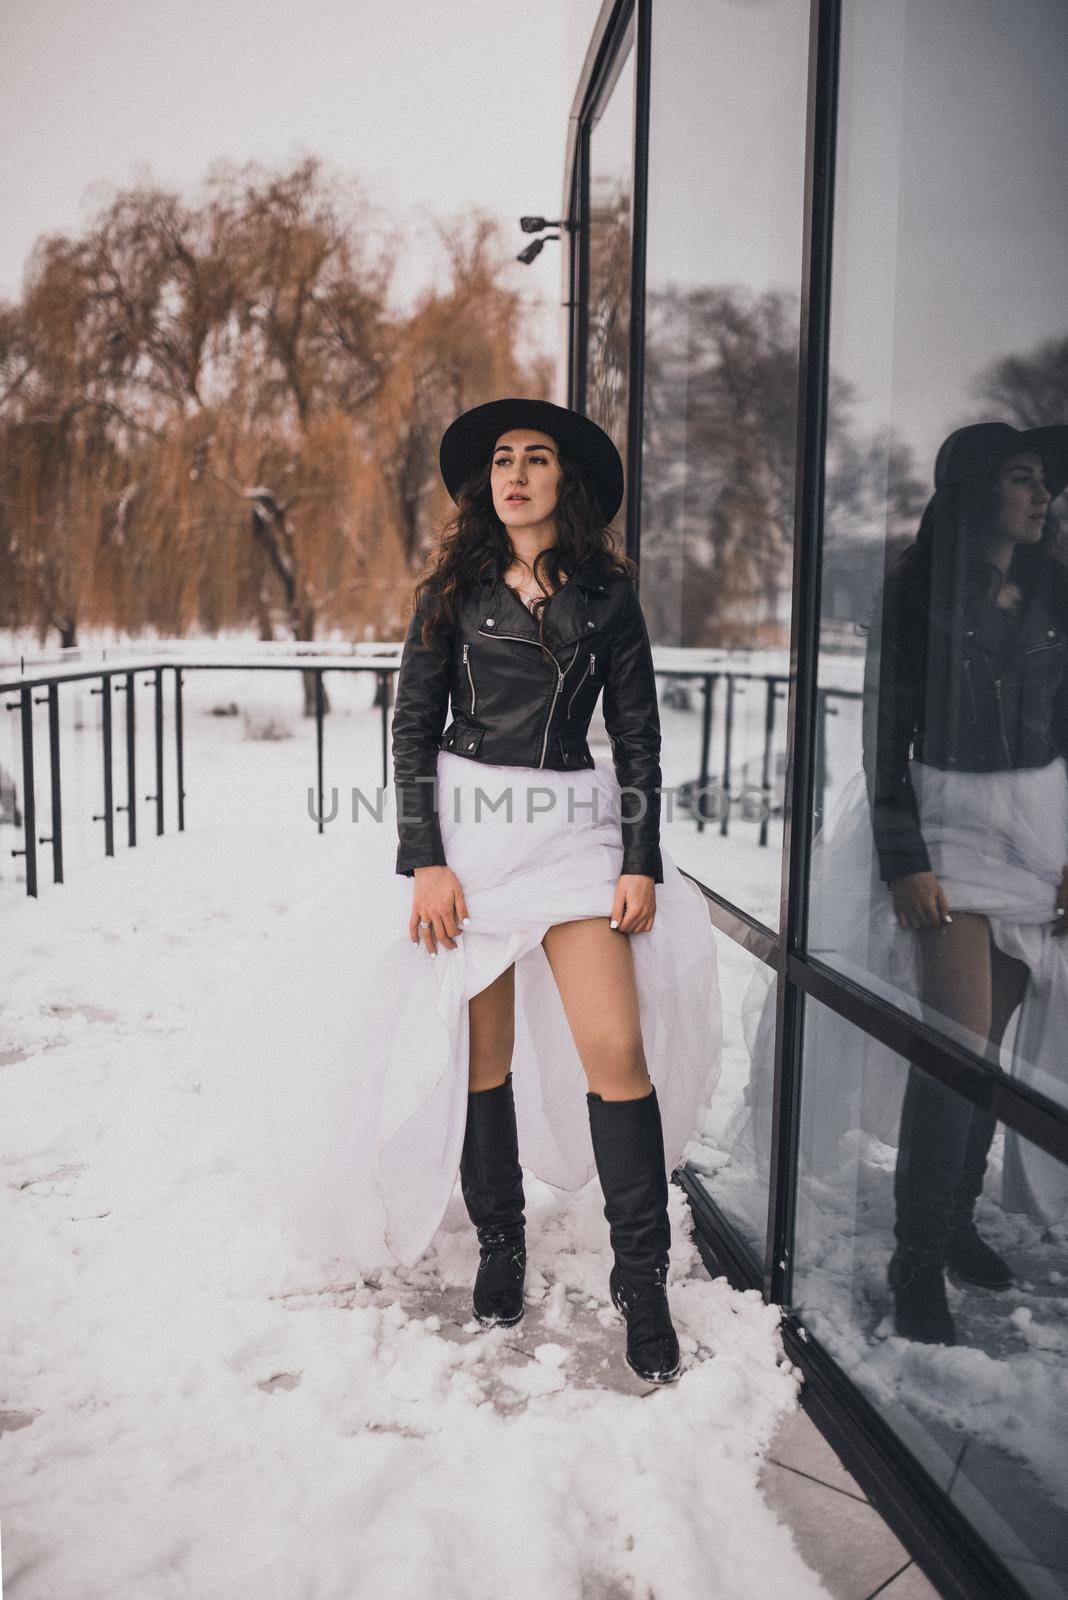 brunette bride woman in wedding white dress, black leather biker jacket and black hat in high boots in winter on the snow. stylish fashion clothing elegant 2021